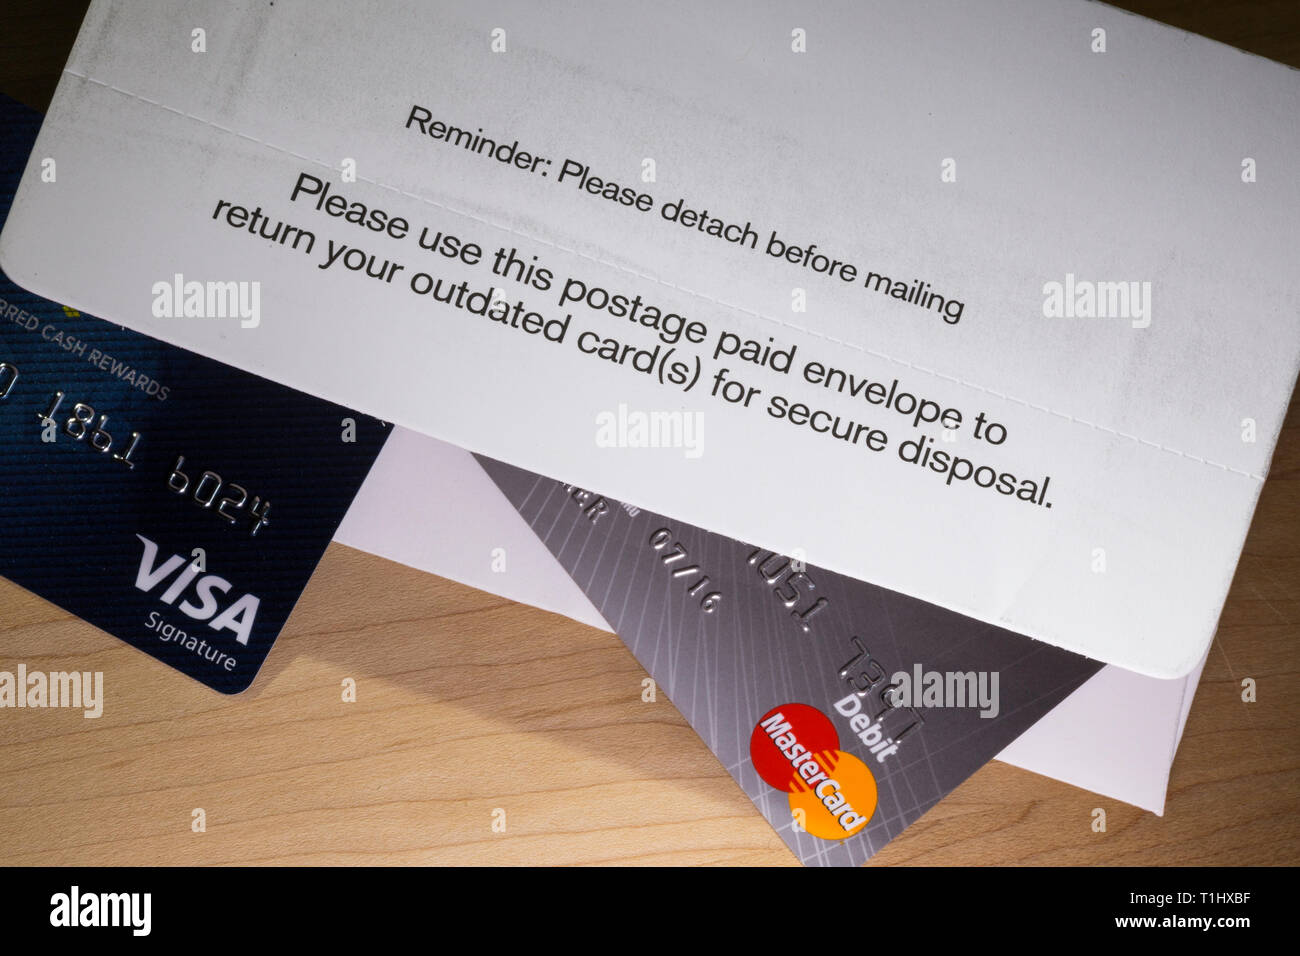 Postage Paid envelope is provided for secure disposal of expired credit cards, USA Stock Photo